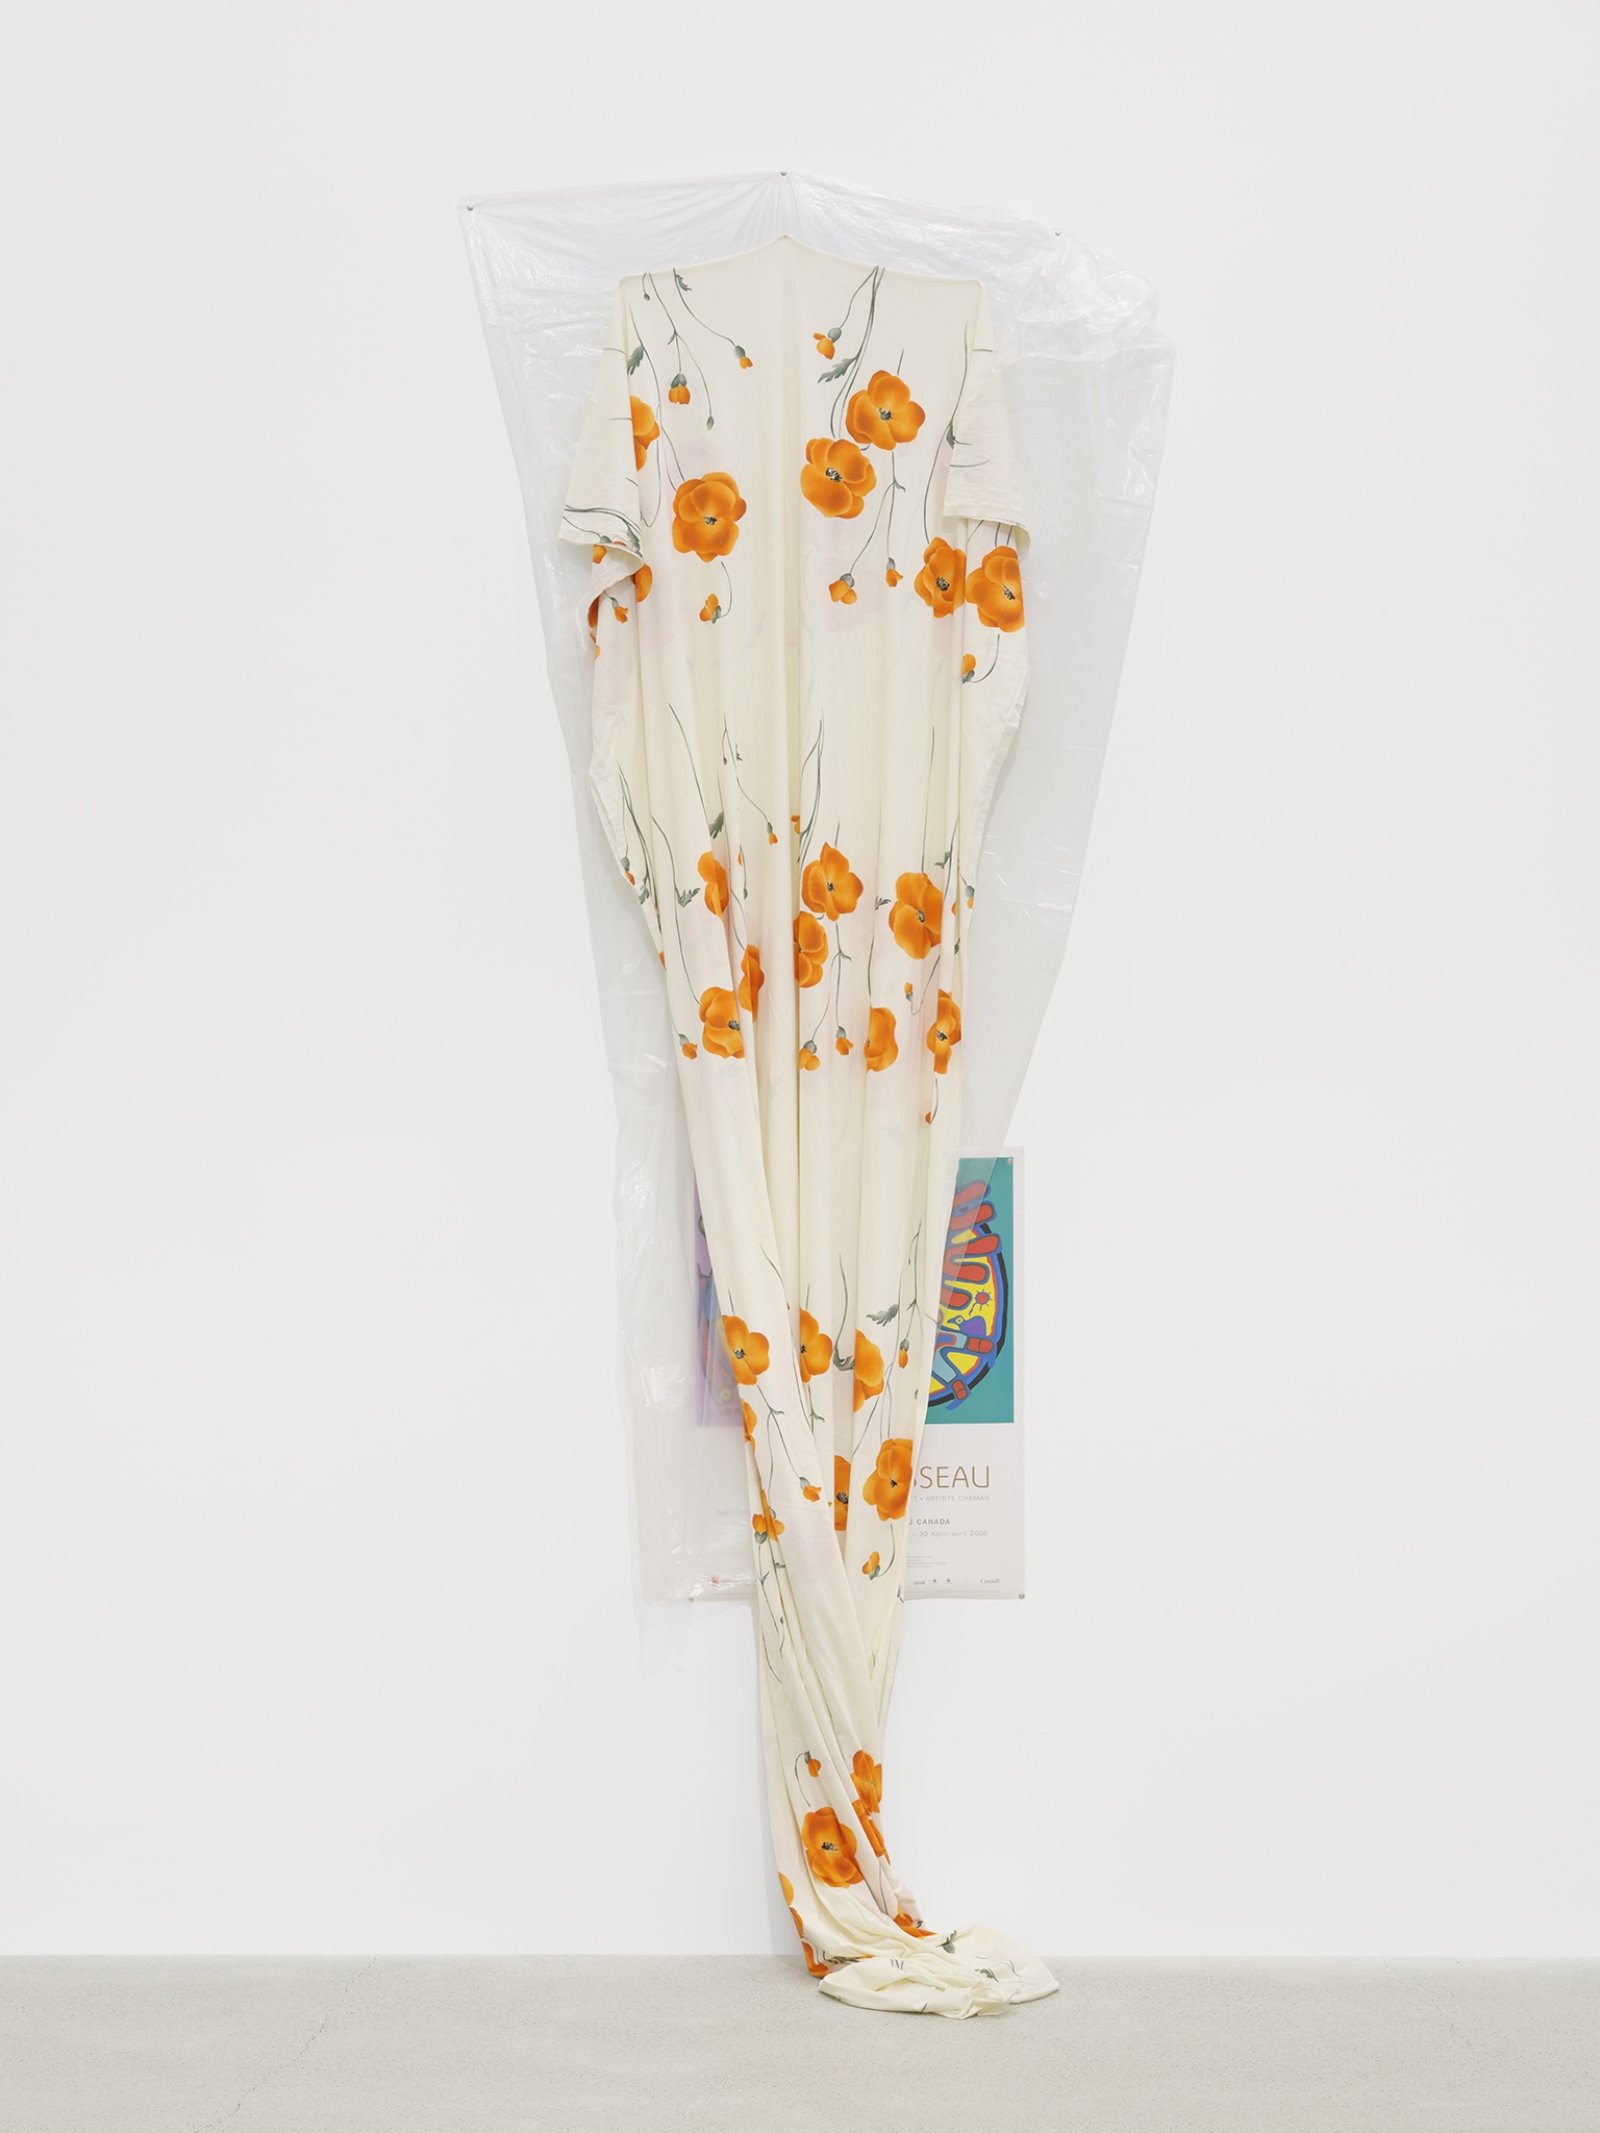 Duane Linklater, body, 2016, plastic sheeting, cotton cloth, nails, thumb tacks, paper poster from National Gallery of Canada, 124 x 35 x 15 in. (315 x 89 x 38 cm)